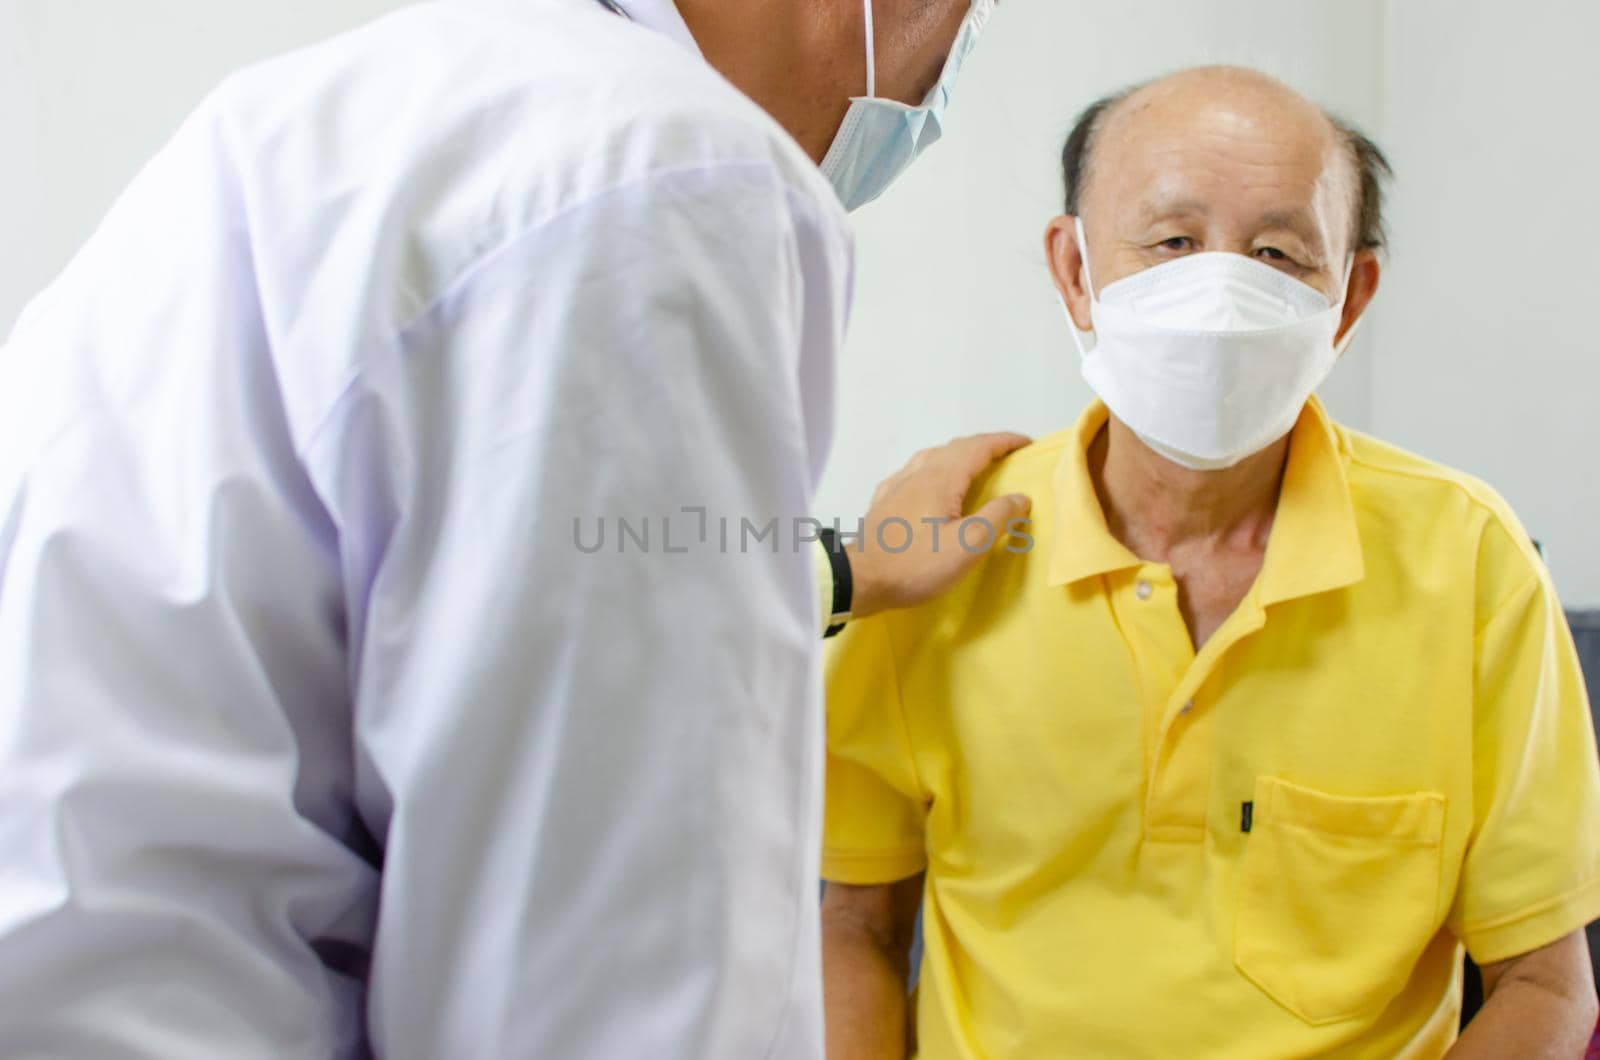 doctor held his shoulder and talked to an elderly man who was sick to give encouragement.